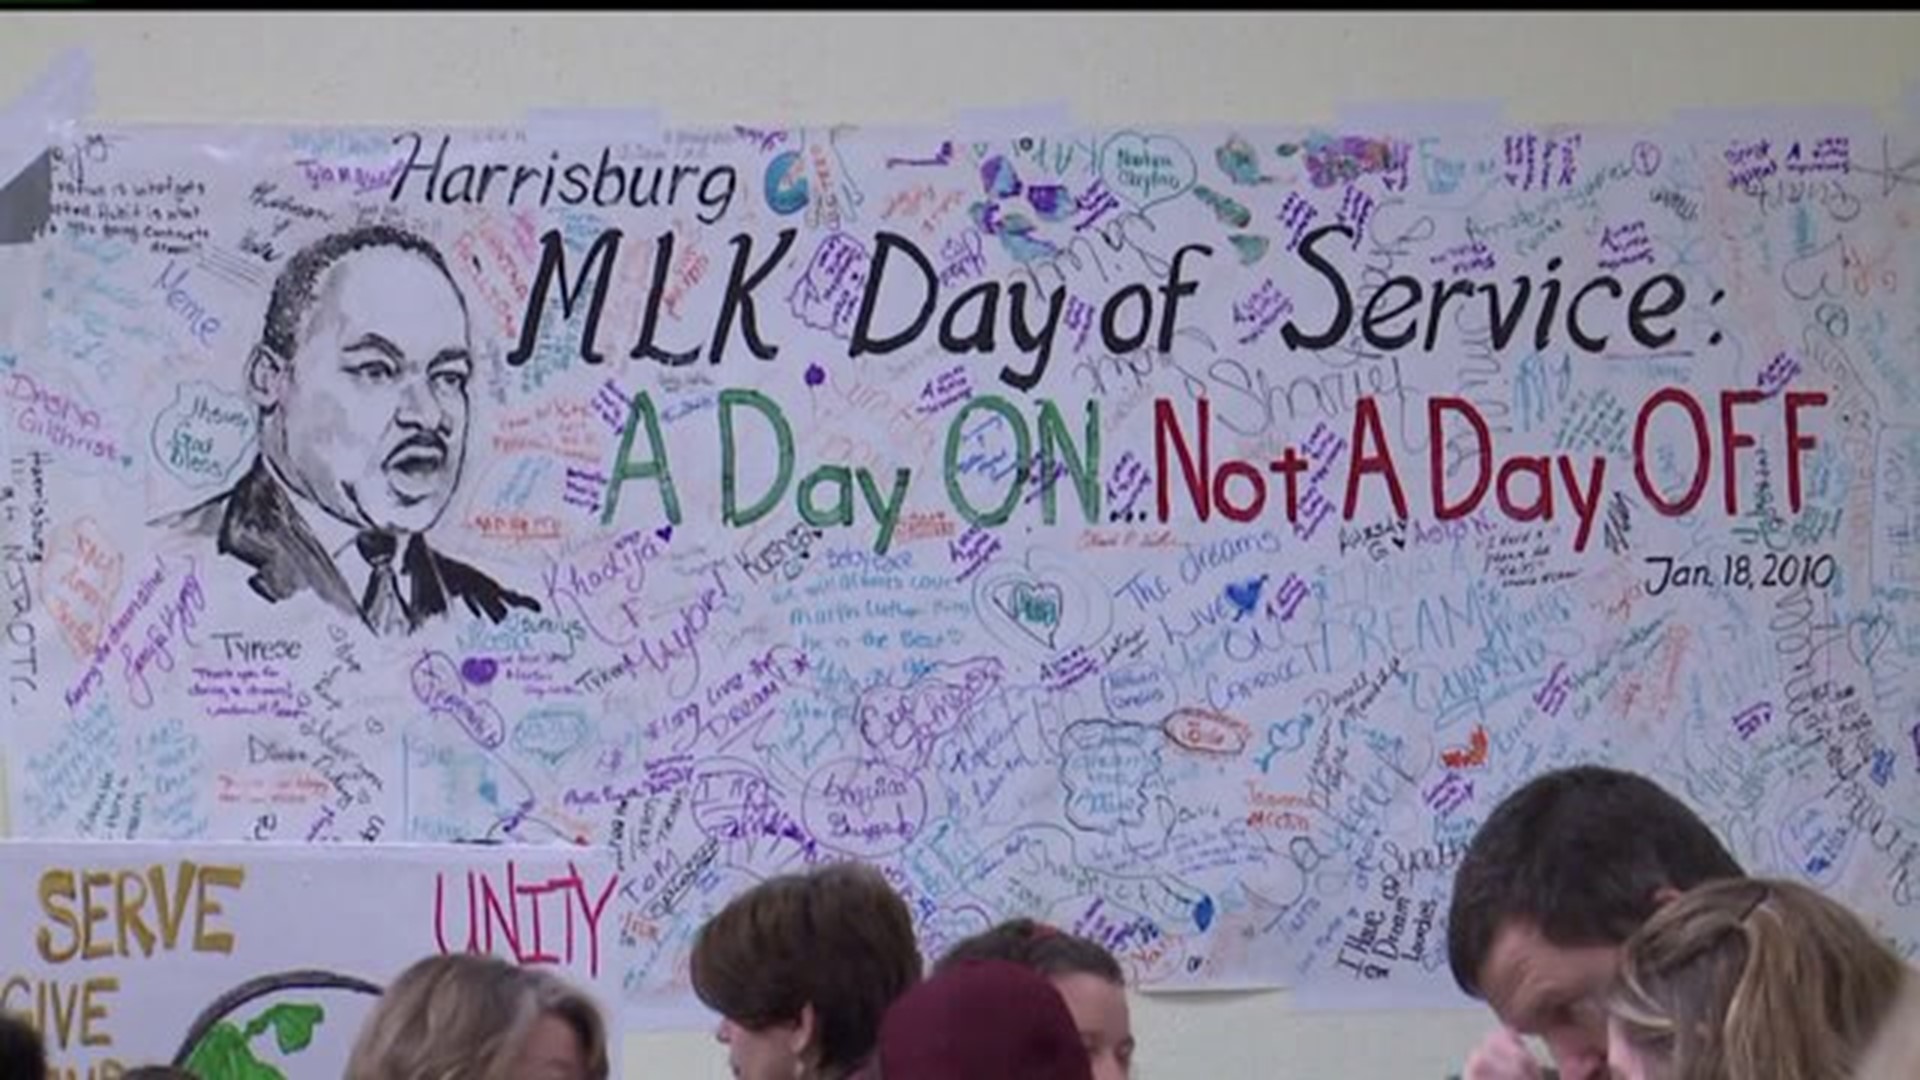 Dozens of volunteer opportunities are available during Central Pennsylvania's MLK Day of Service on Jan. 17.